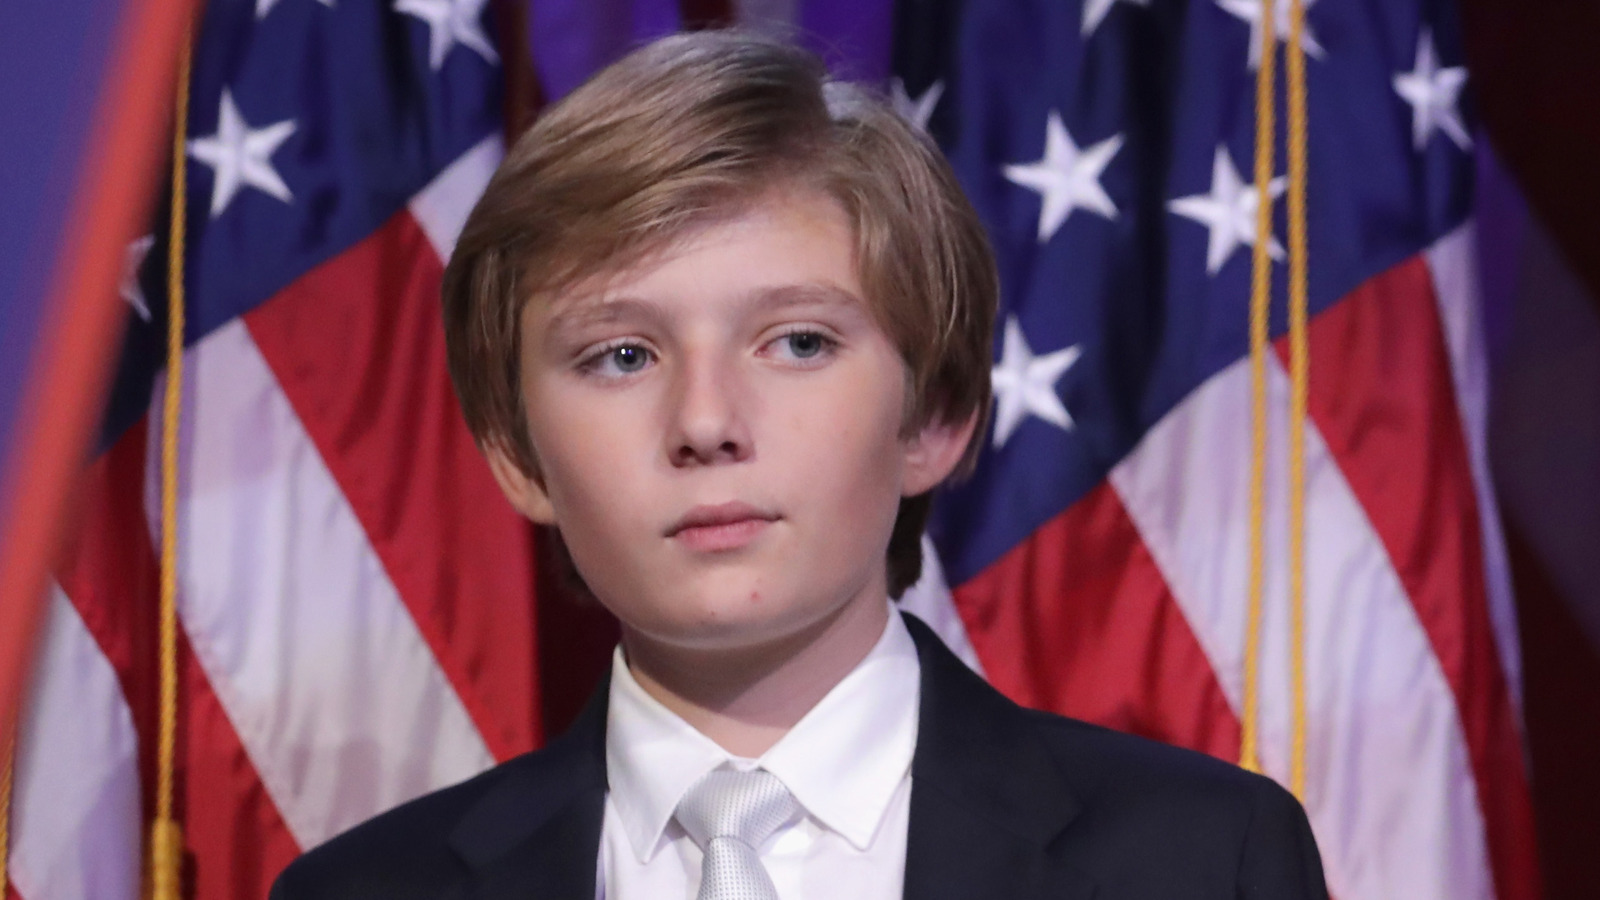 Did Barron Trump Quit Soccer In High School? Here's What We Know